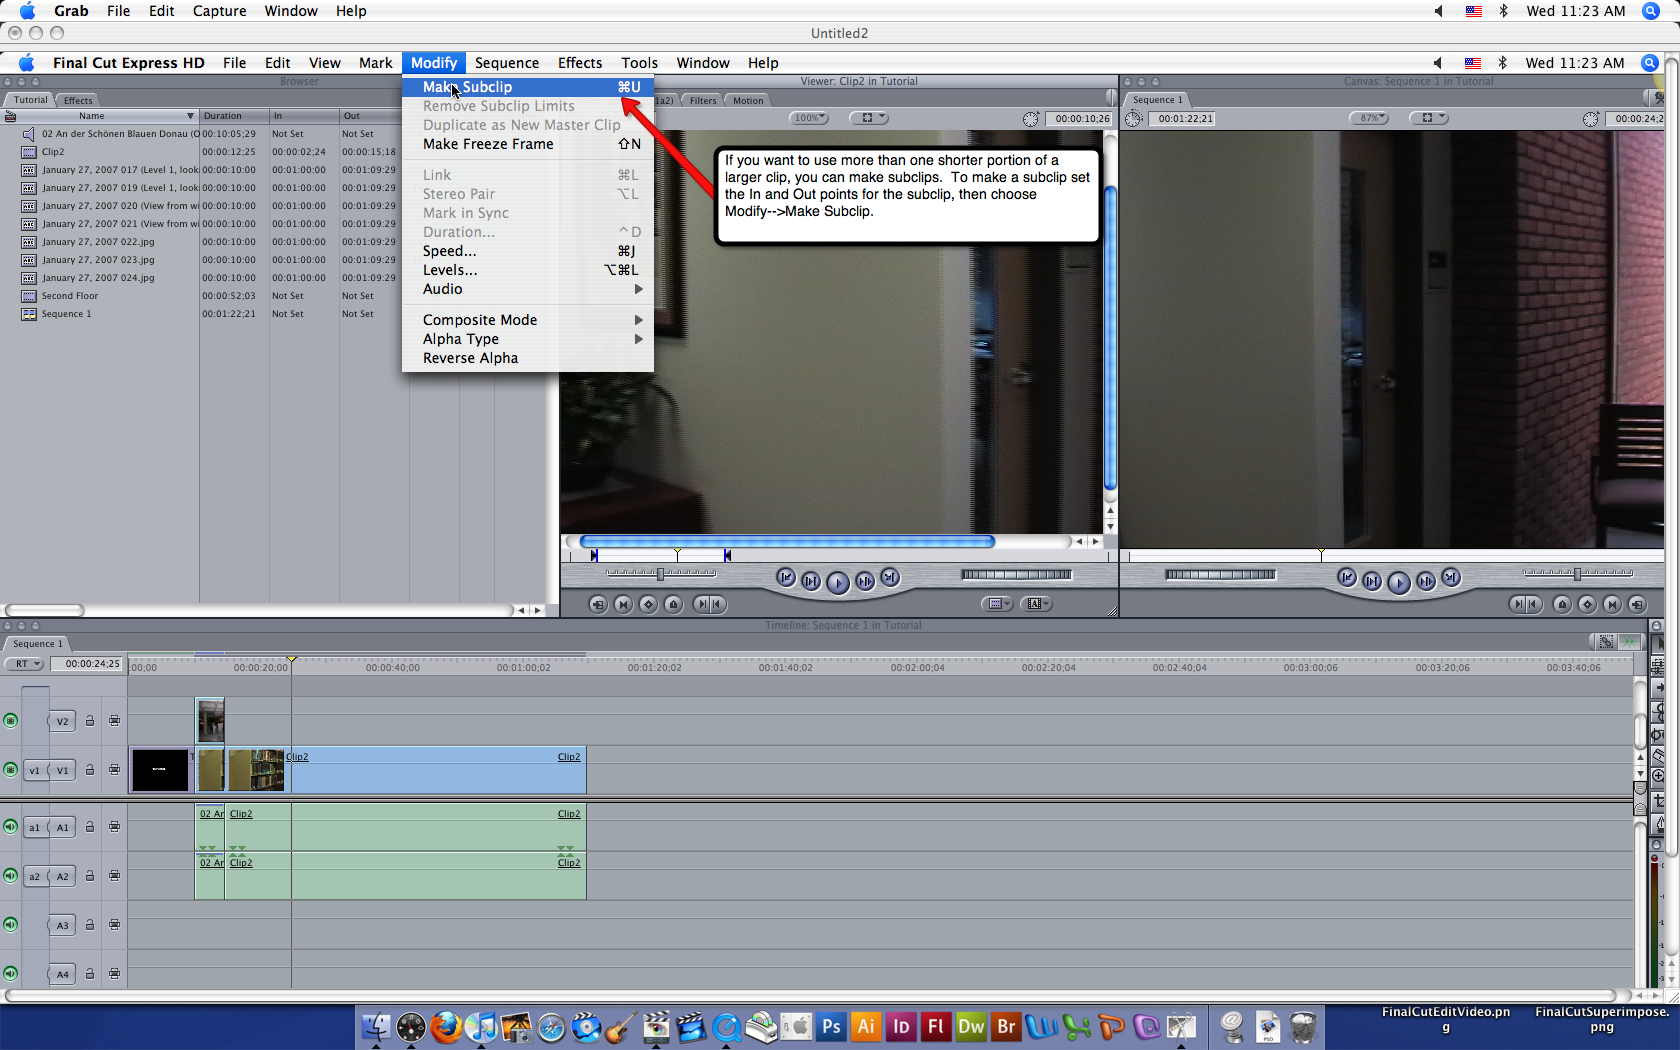 Visual guide to editing video in Final Cut Express HD step 2.